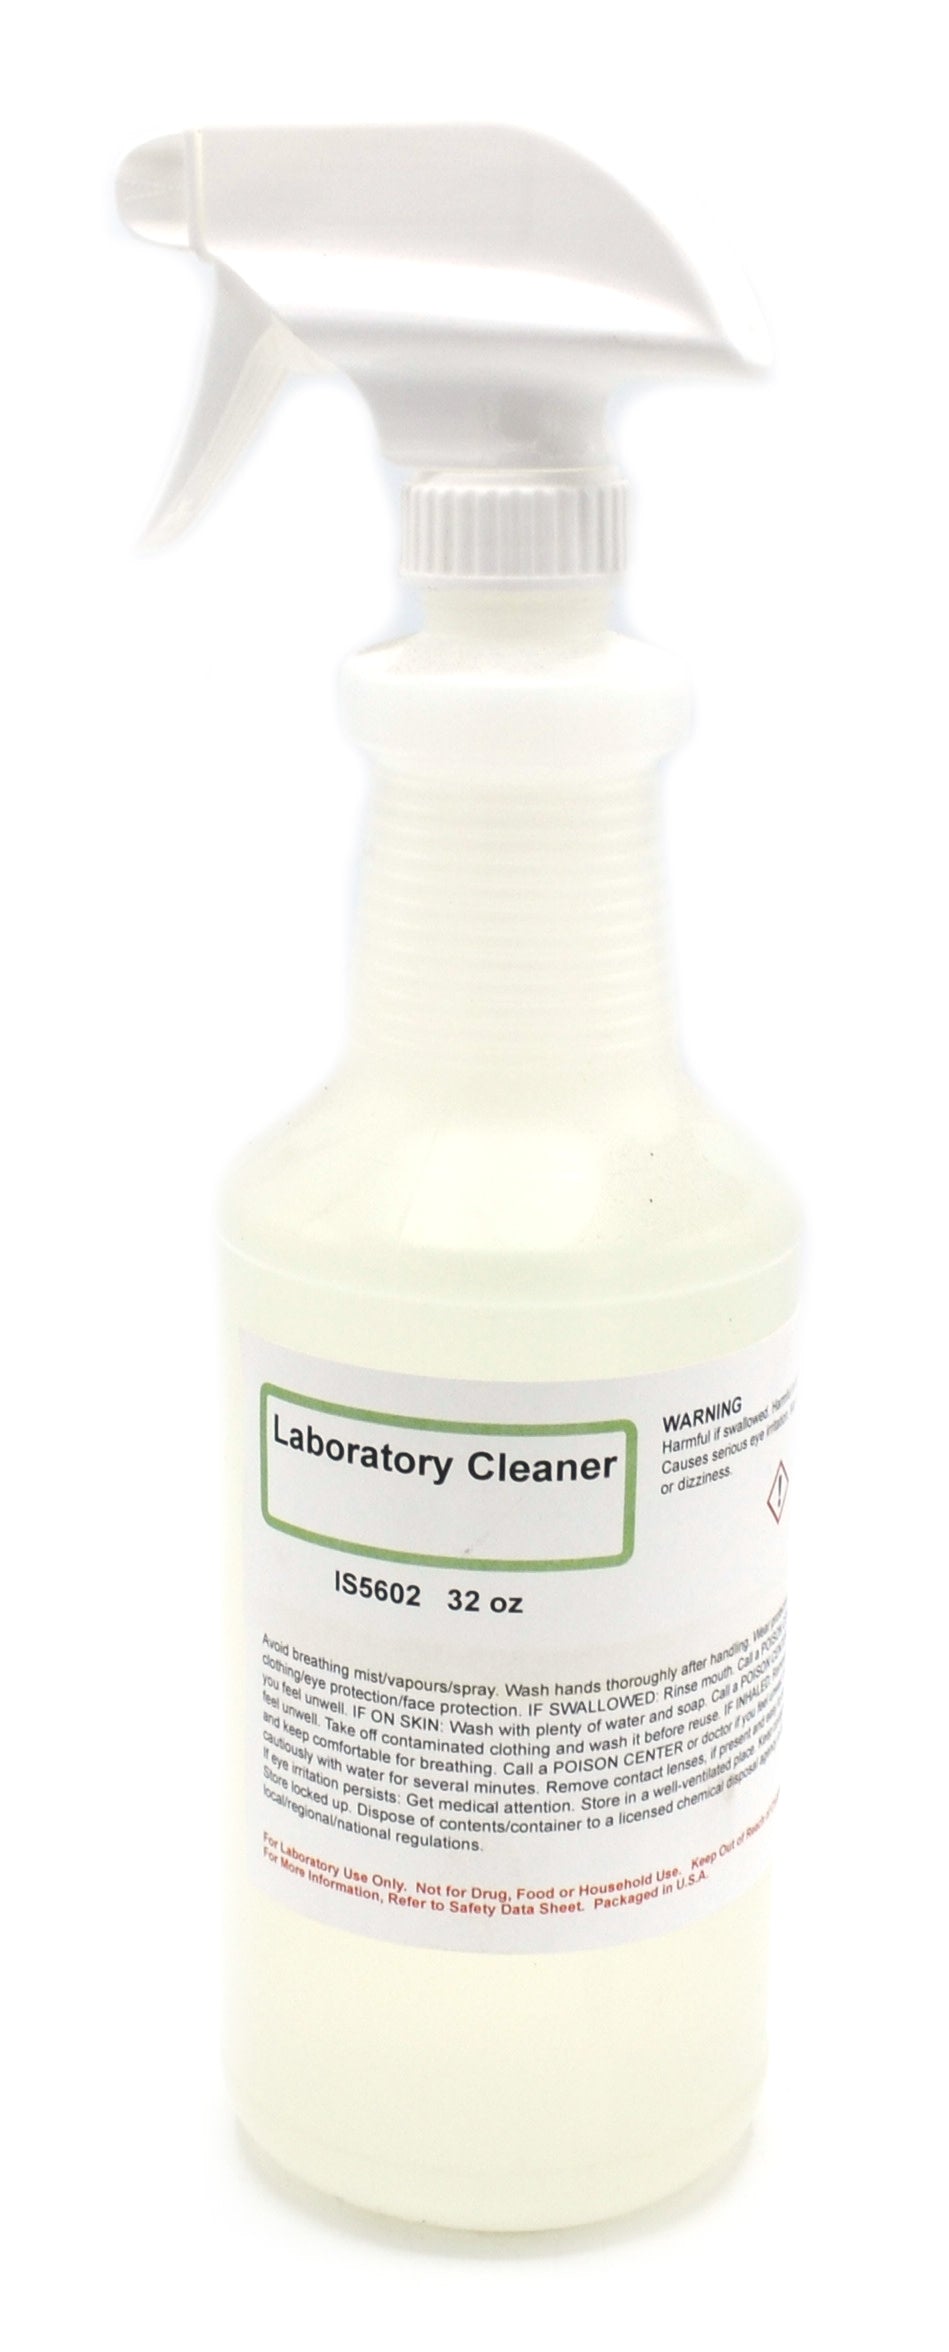 Chemical Cleaners